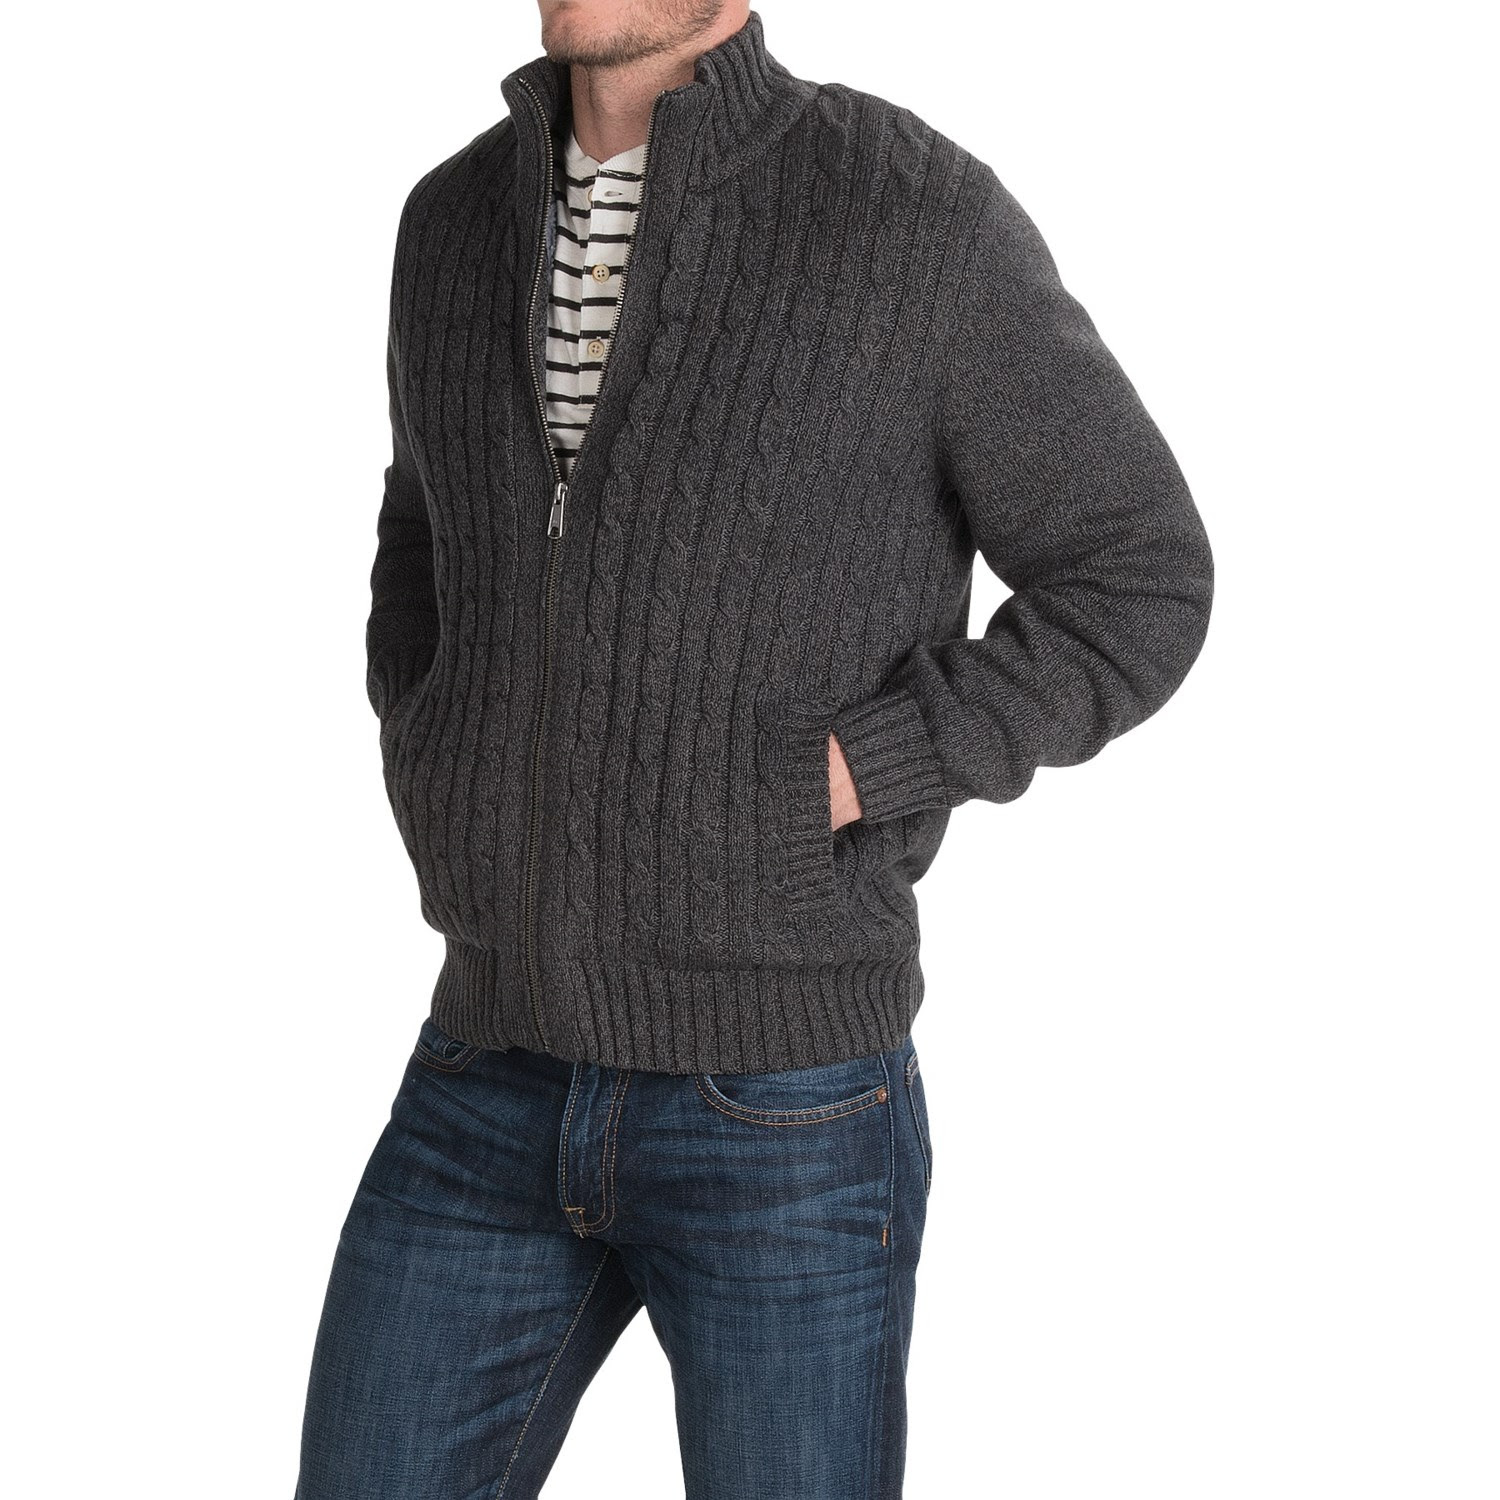 Men's Clothing & Accessories: Men's Sherpa Sweaters